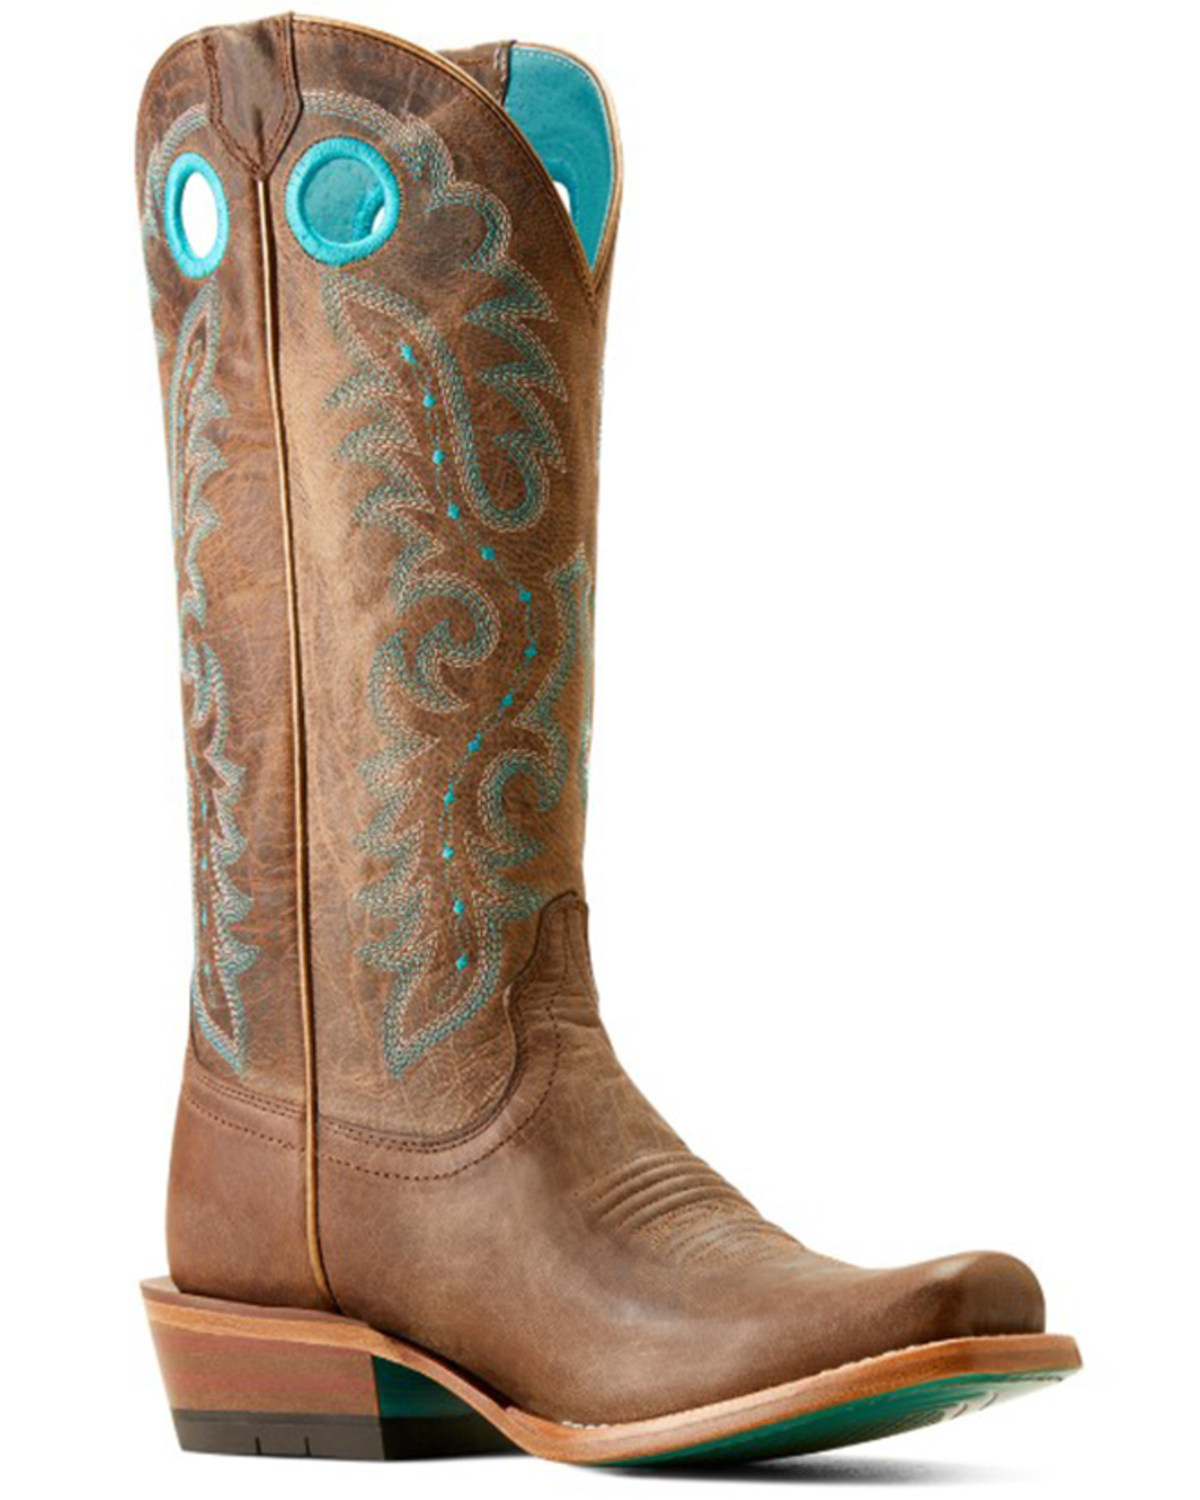 Ariat Women's Futurity Boon Western Boots - Square Toe